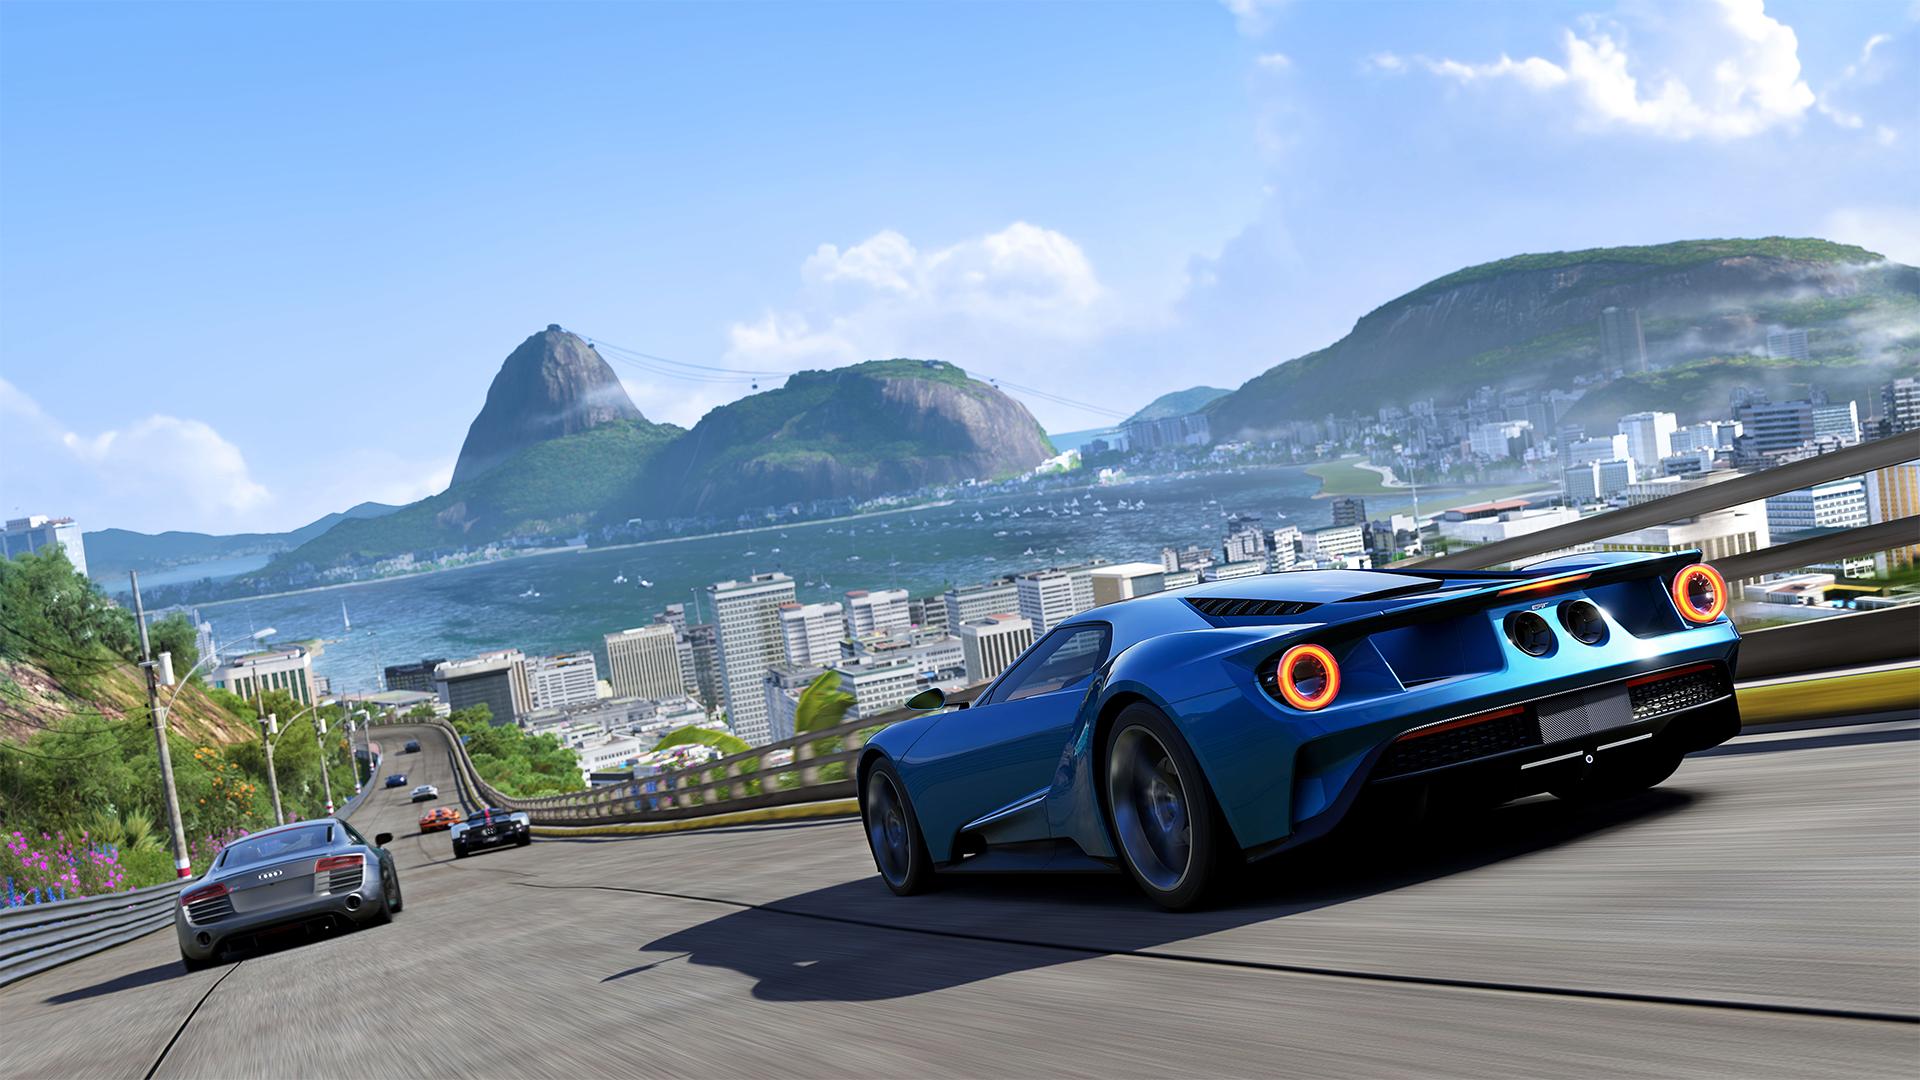 Forza Motorsport 6 hands-on: Bigger, wetter, and a new card-based mod  system - CNET